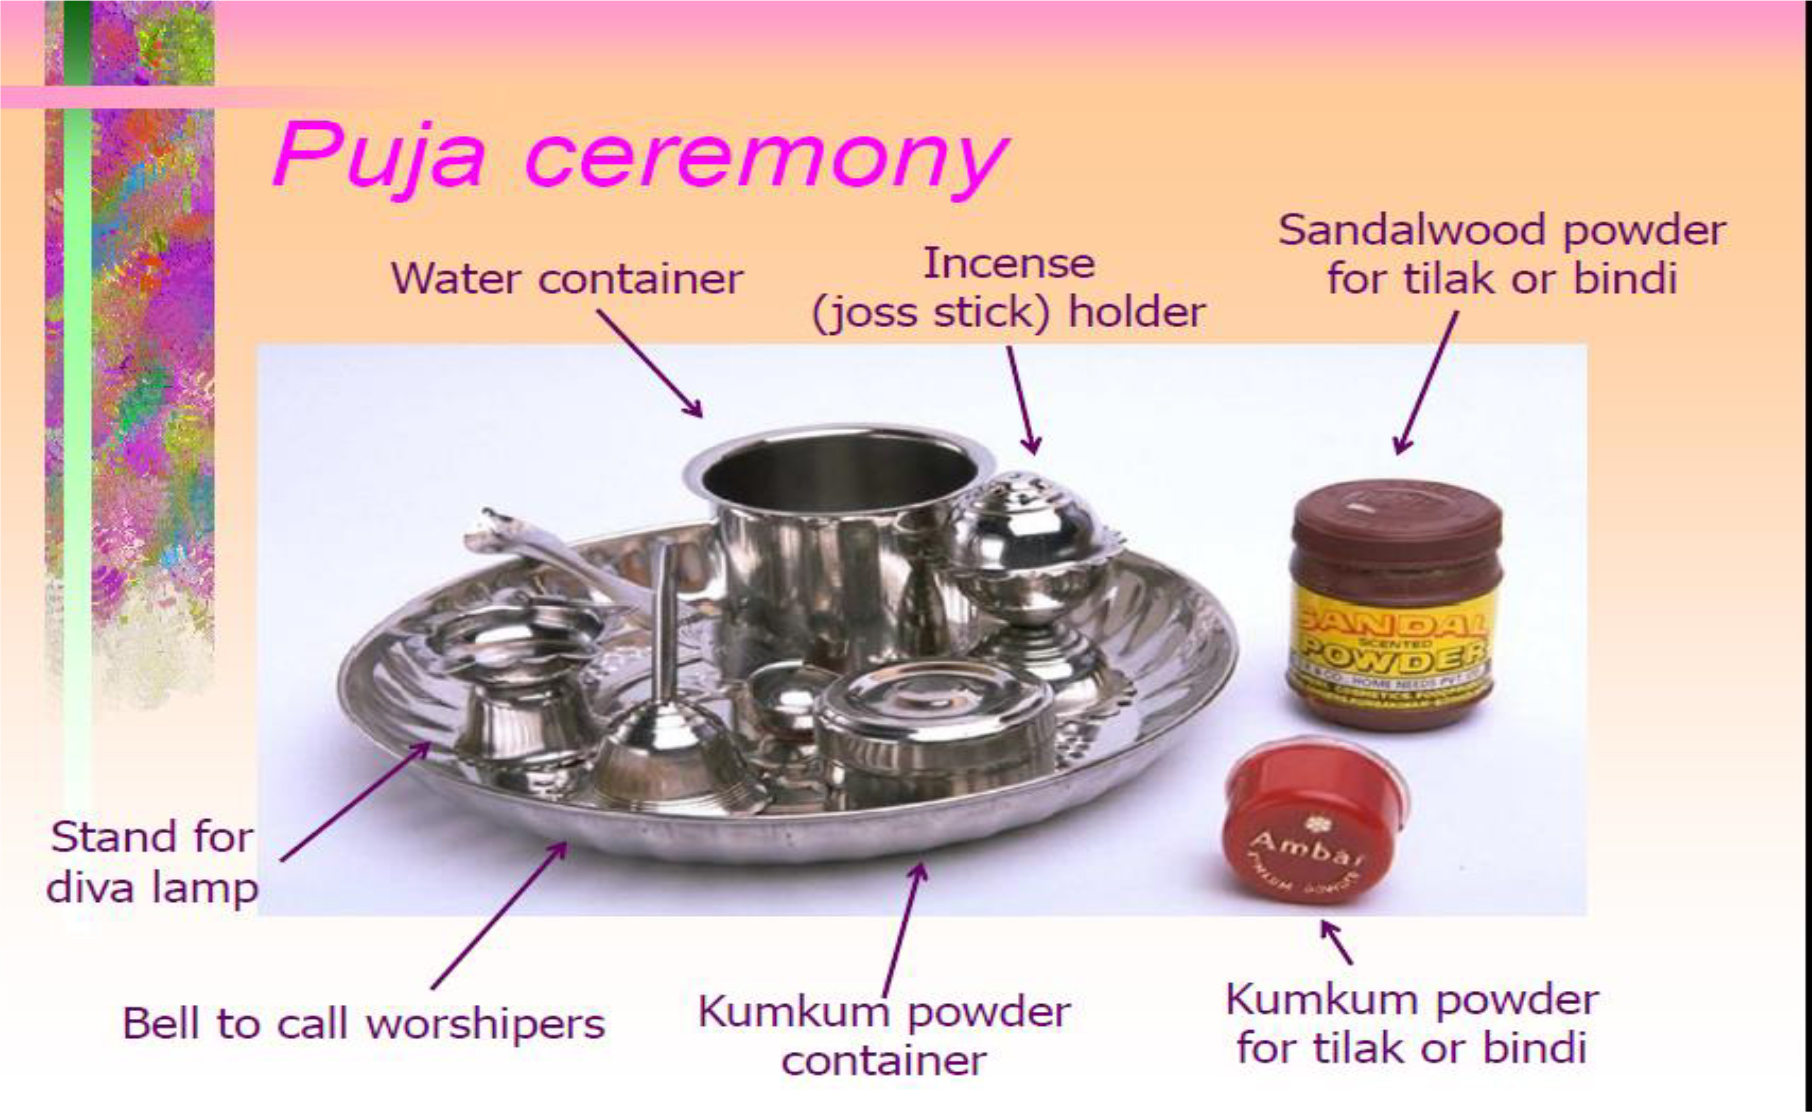 This annexure has two images. One of a puja ceremony at home and another of the items needed for a puja ceremony.